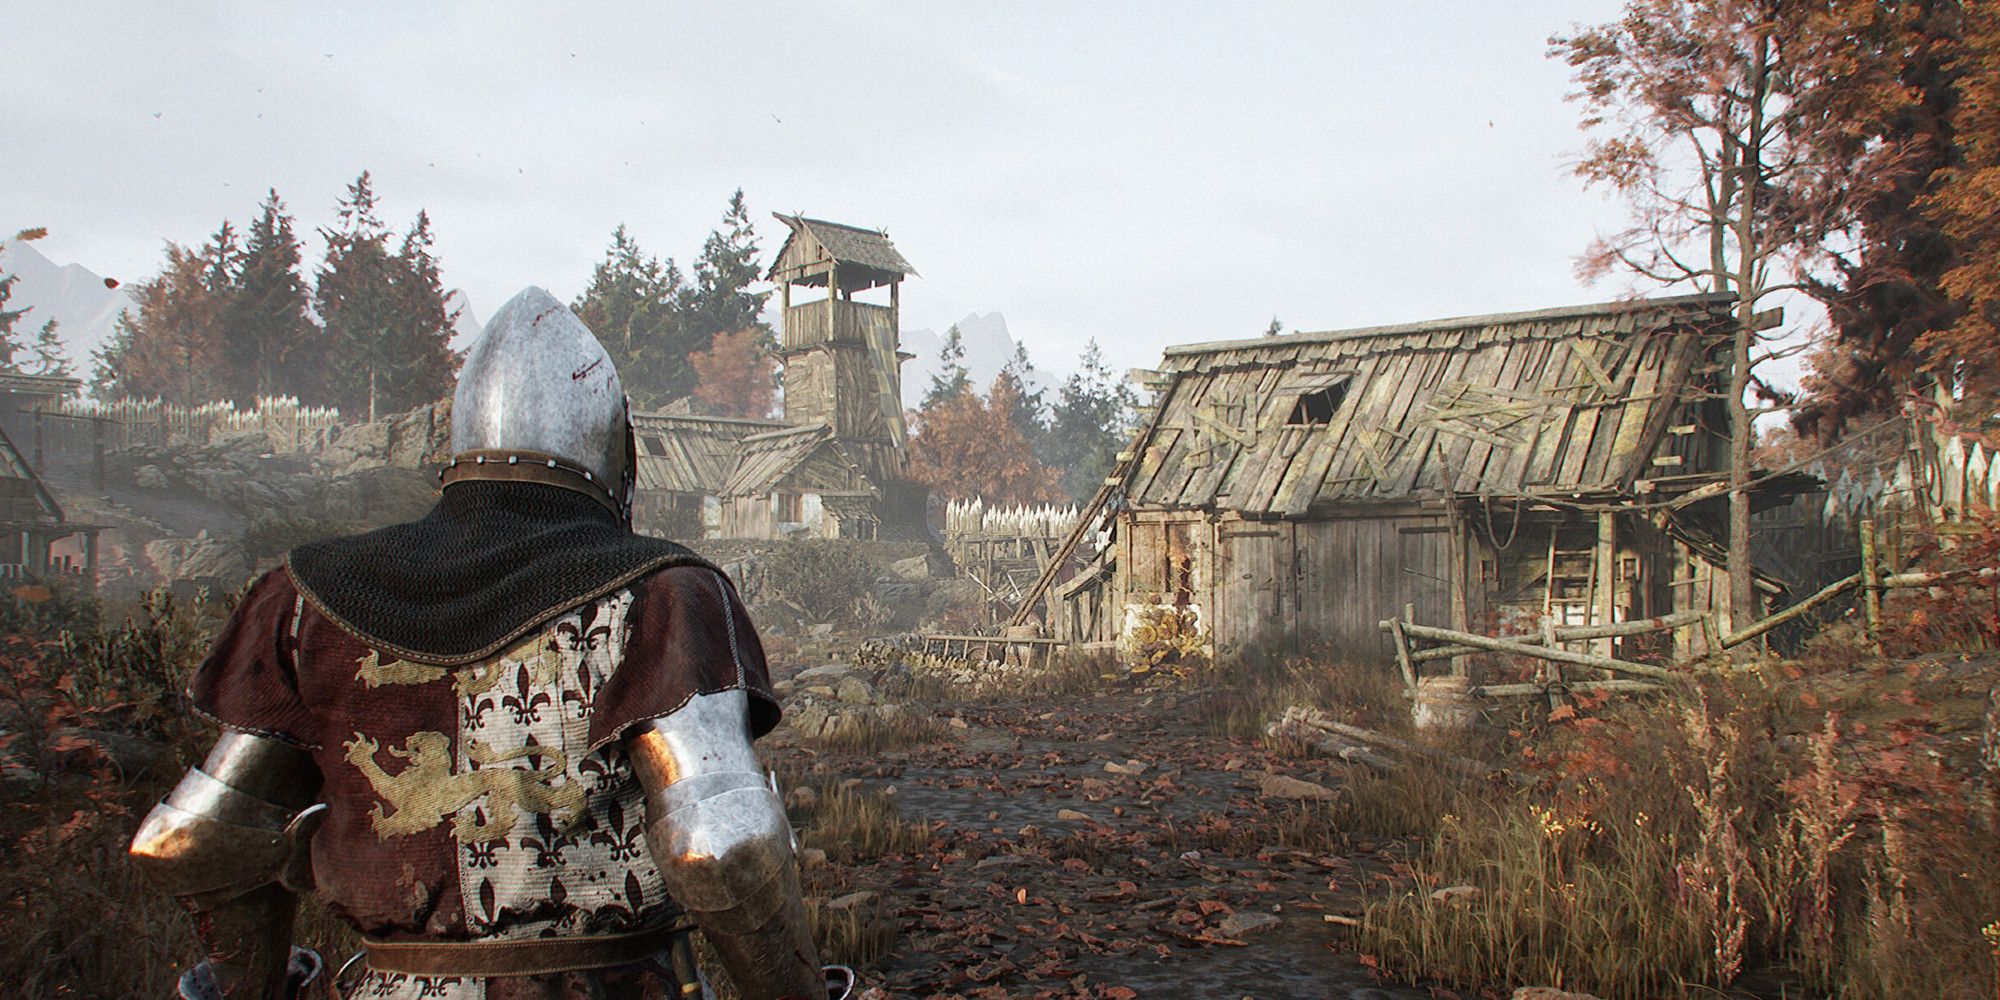 An armored knight surveying some ruined wooden buildings in Blight: Survival.